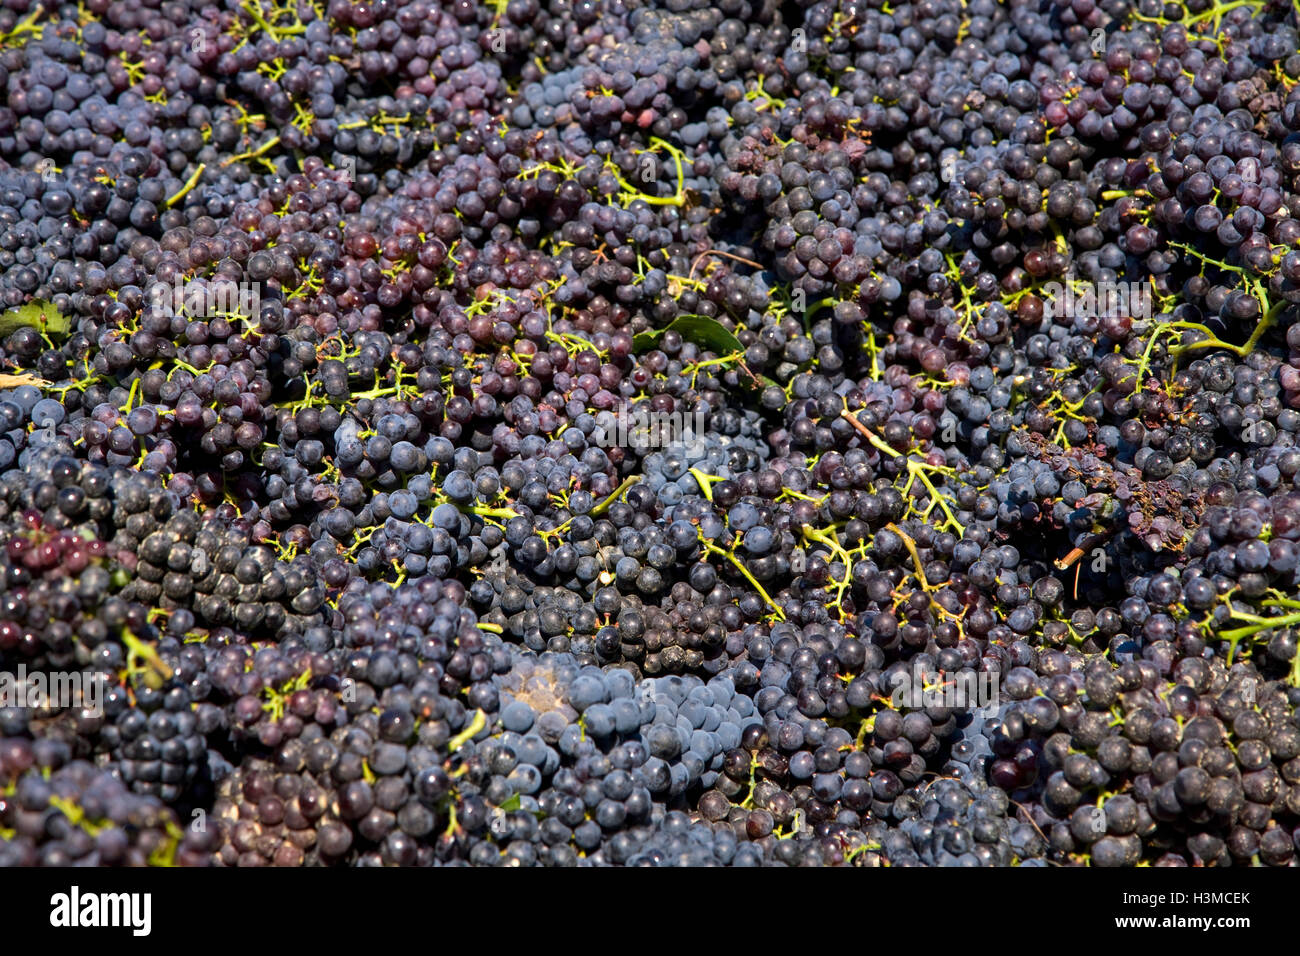 Harvested grapes, Langhe Nebbiolo, Piedmont, Italy Stock Photo